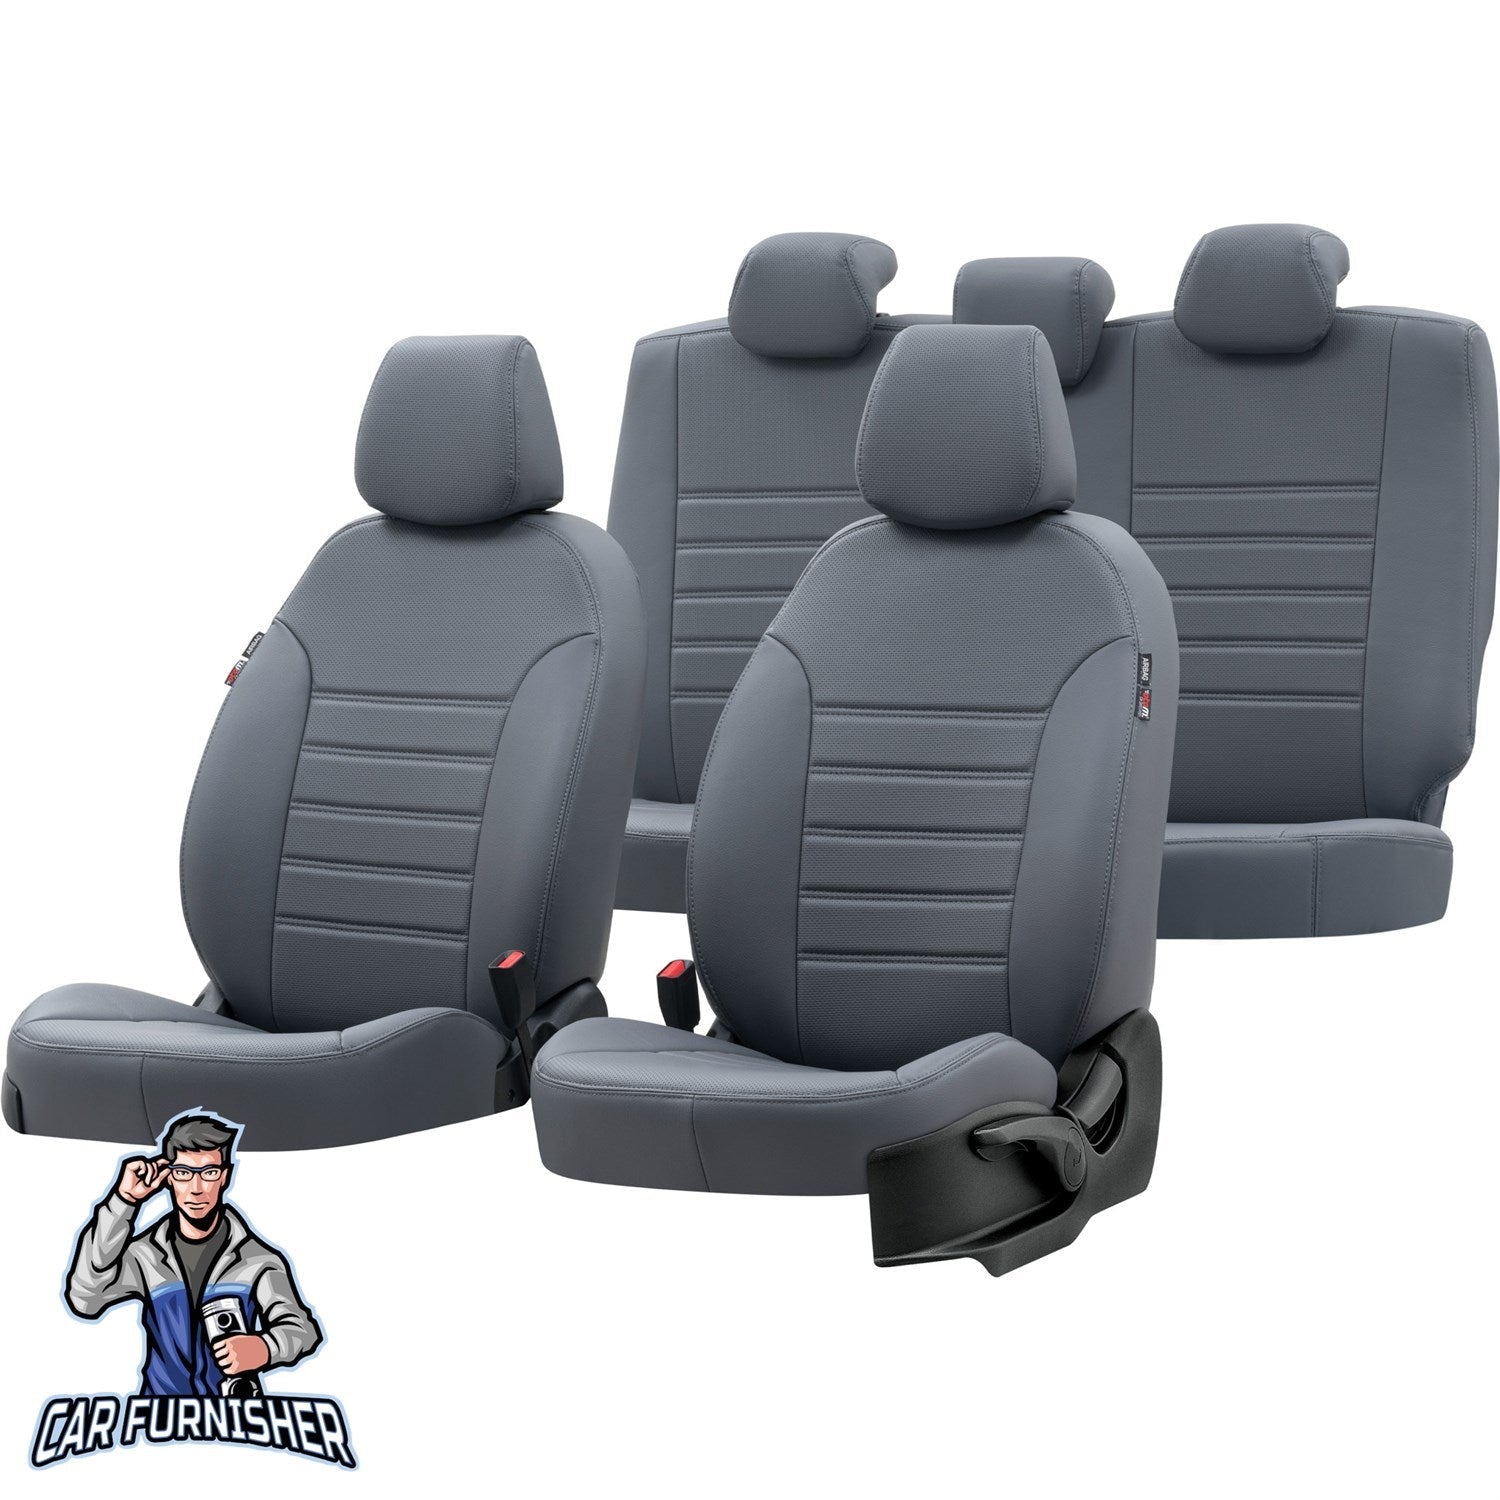 Fiat Linea Car Seat Covers 2007-2017 New York Design Smoked Full Set (5 Seats + Handrest) Leather & Fabric